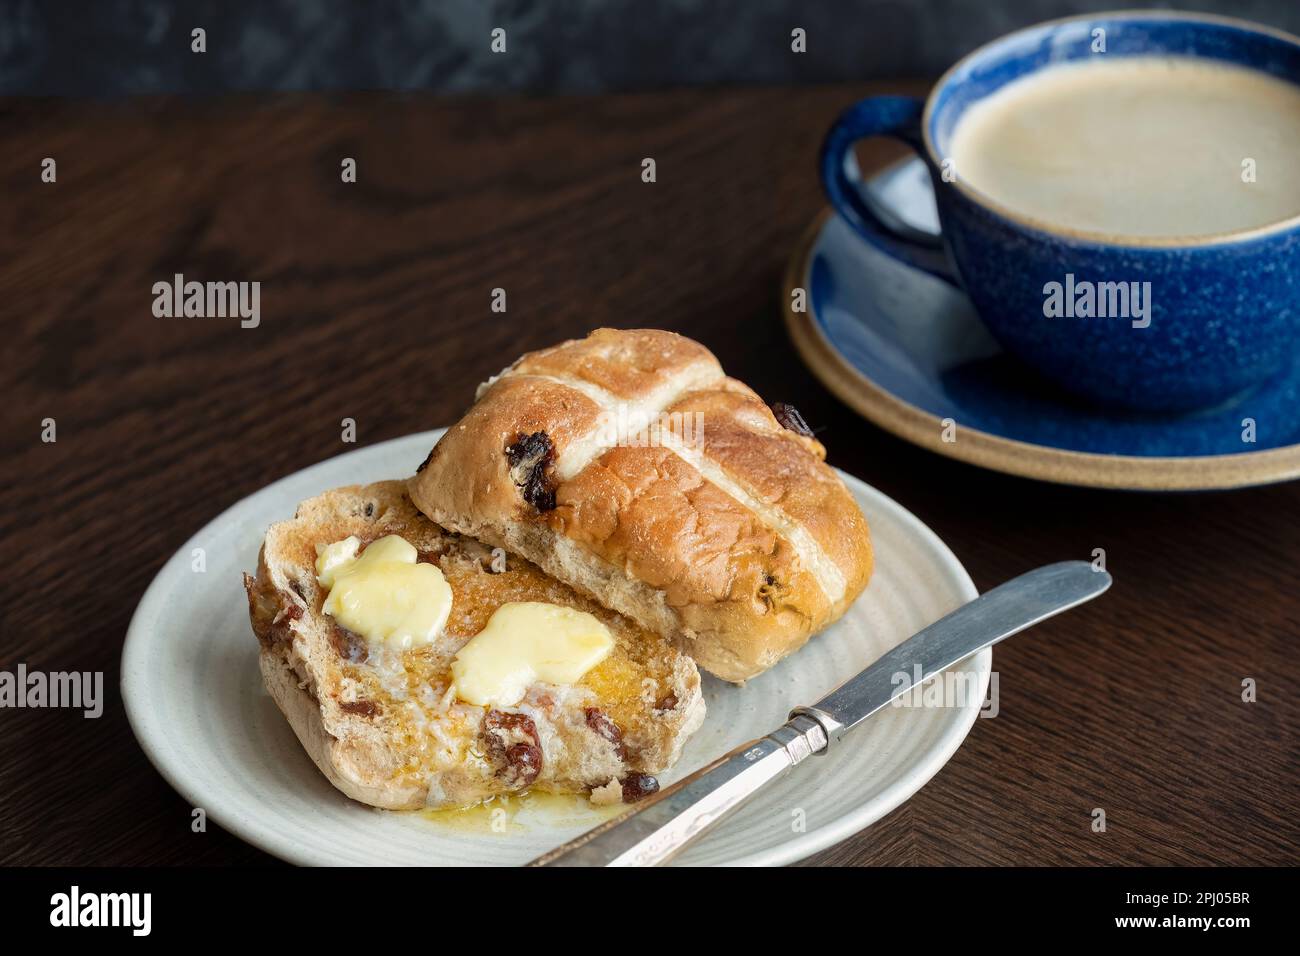 A Easter Hot Cross Bun, toasted and served with butter which is melting on the warm bun. Traditionally served on Good Friday in the UK Stock Photo